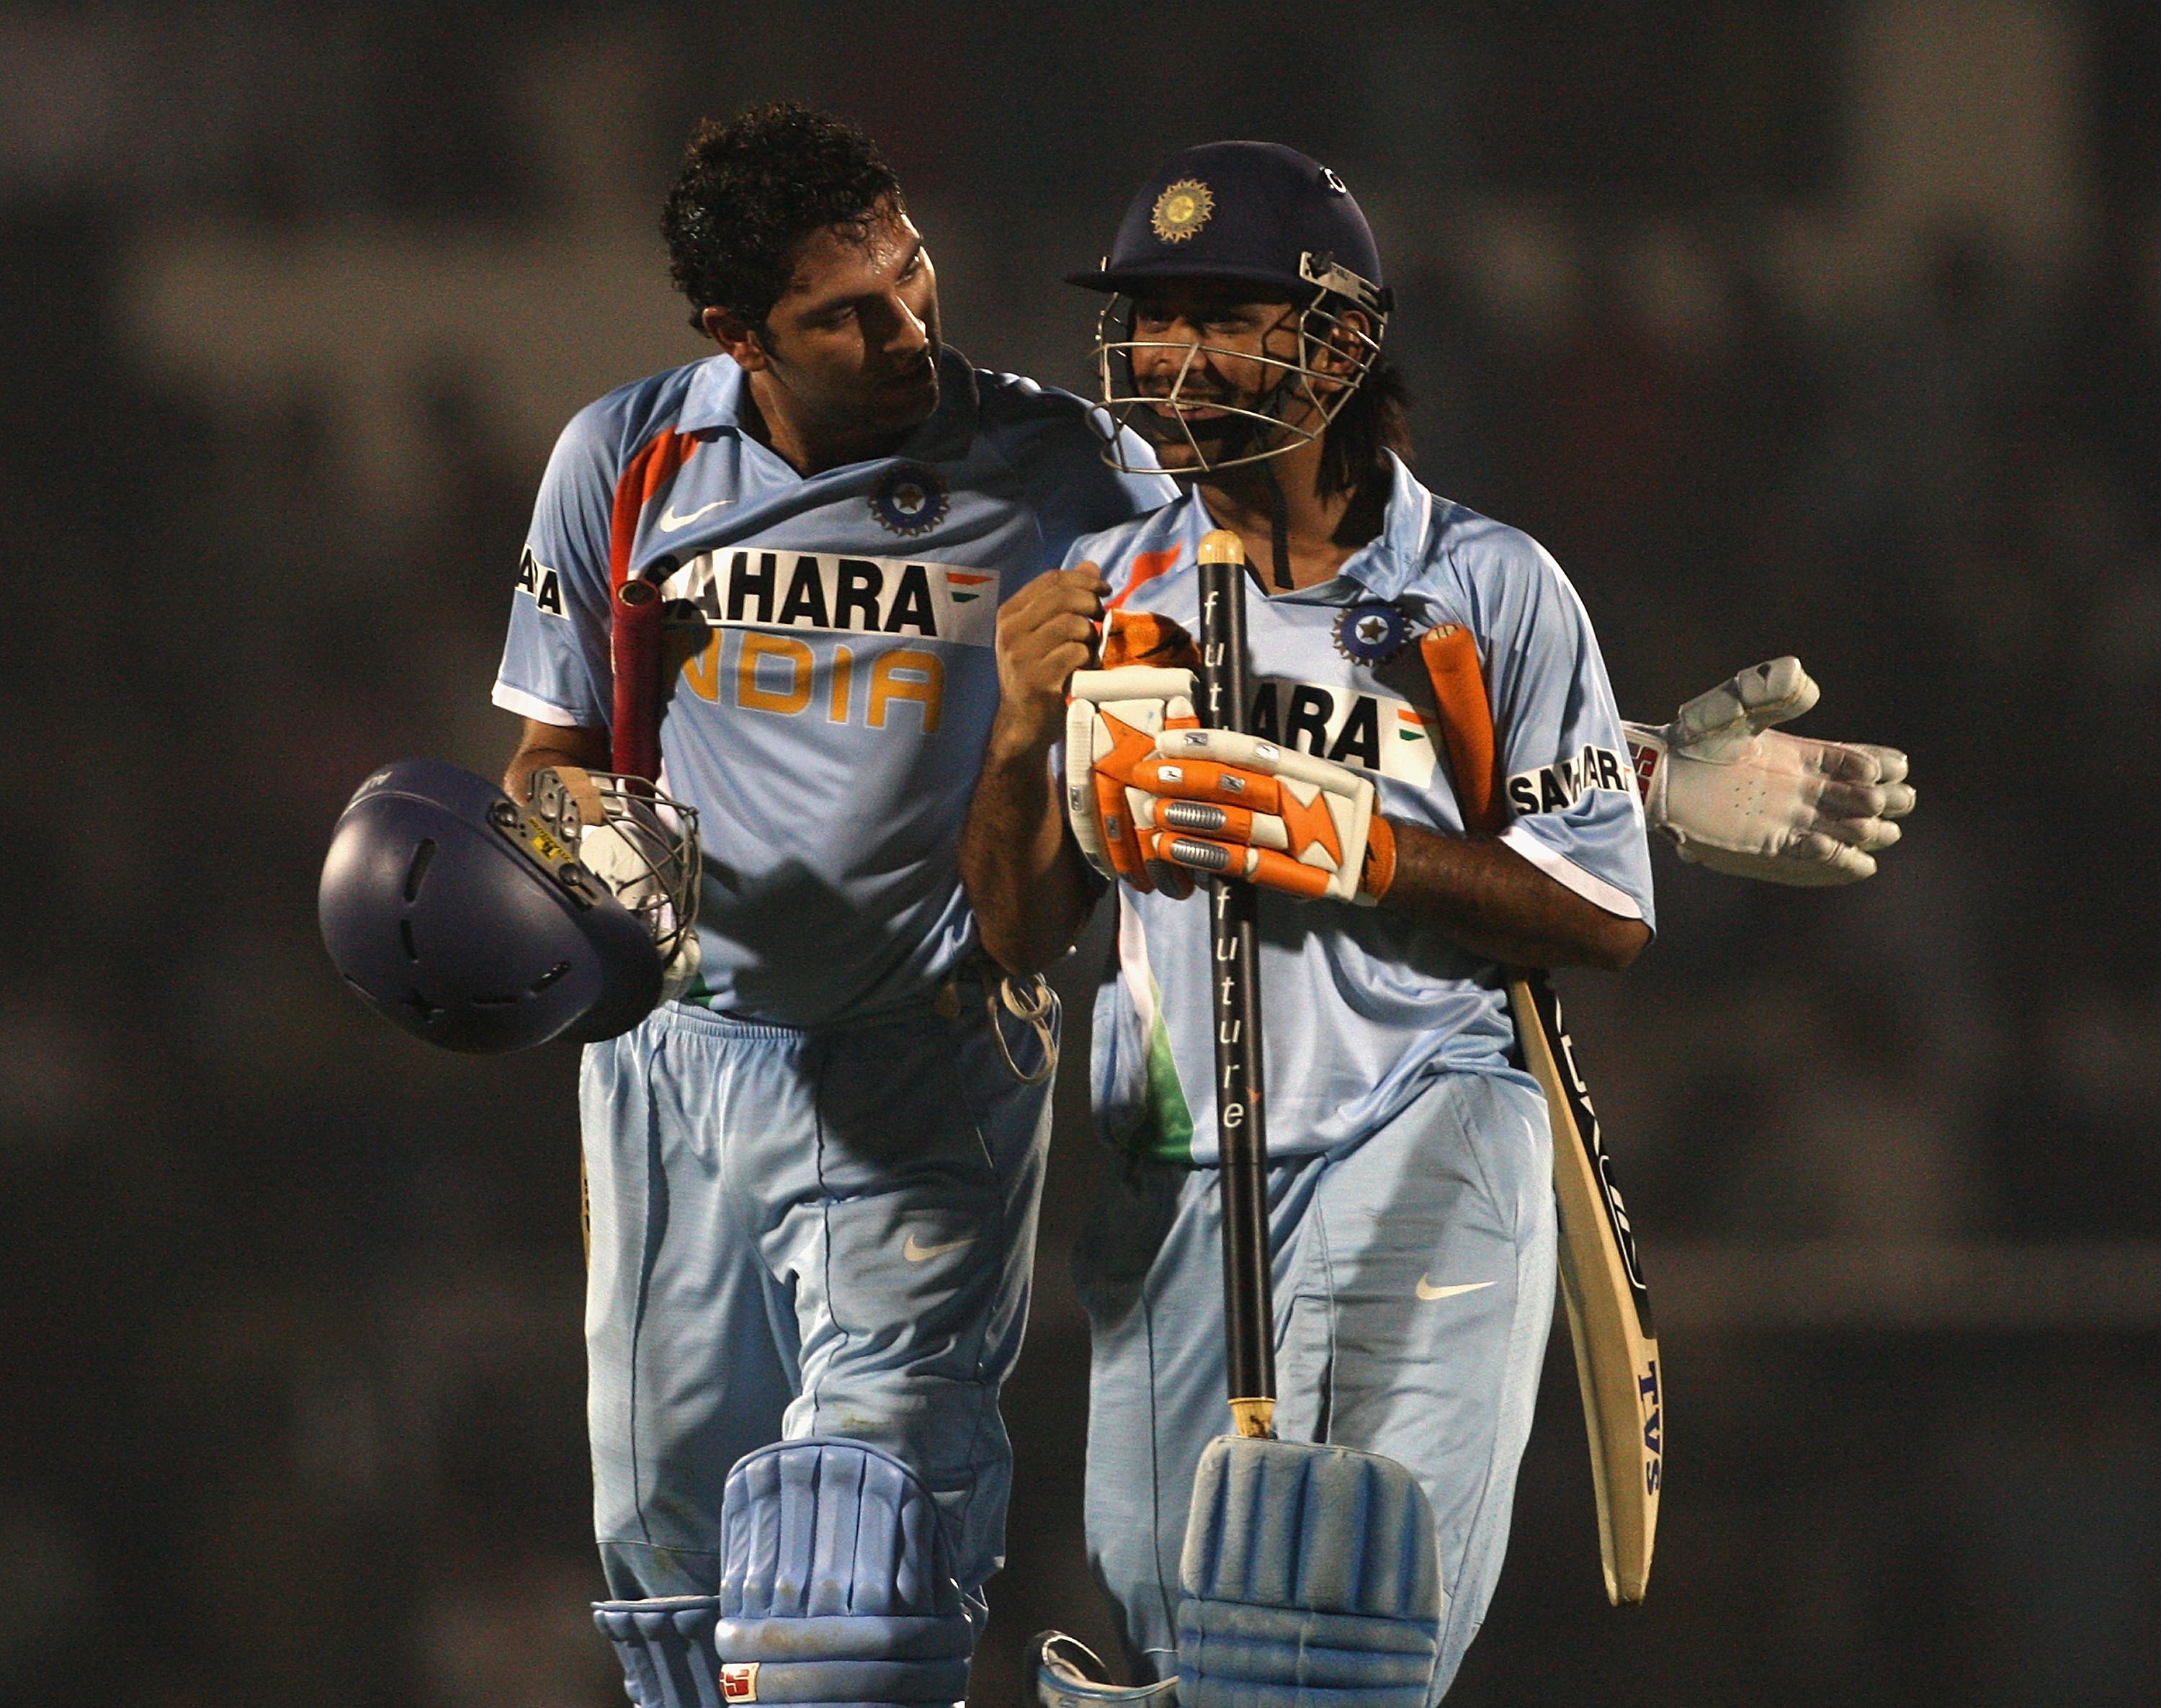 Beating Australia was a big boost for us to win the 2007 World T20, admits Yuvraj Singh